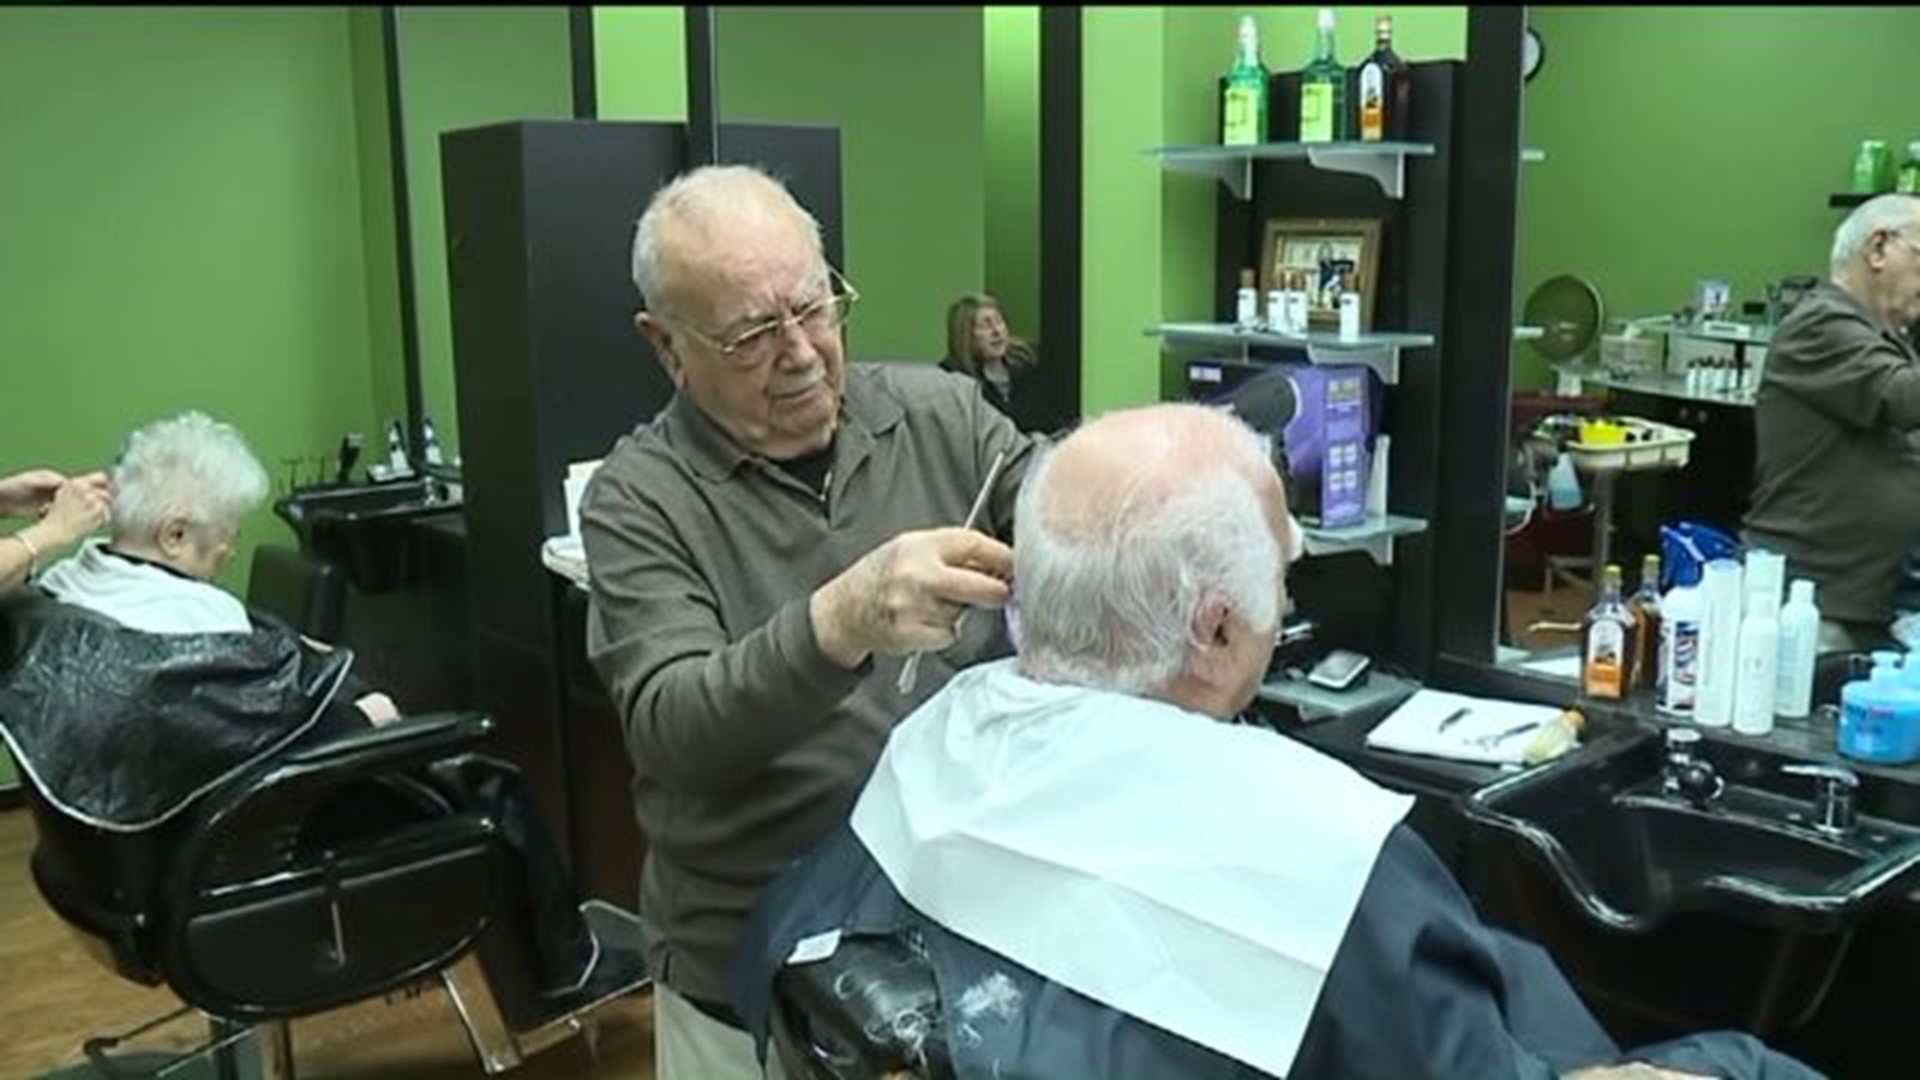 A Cut Above the Rest: Clipping Hair in Wilkes-Barre at 90